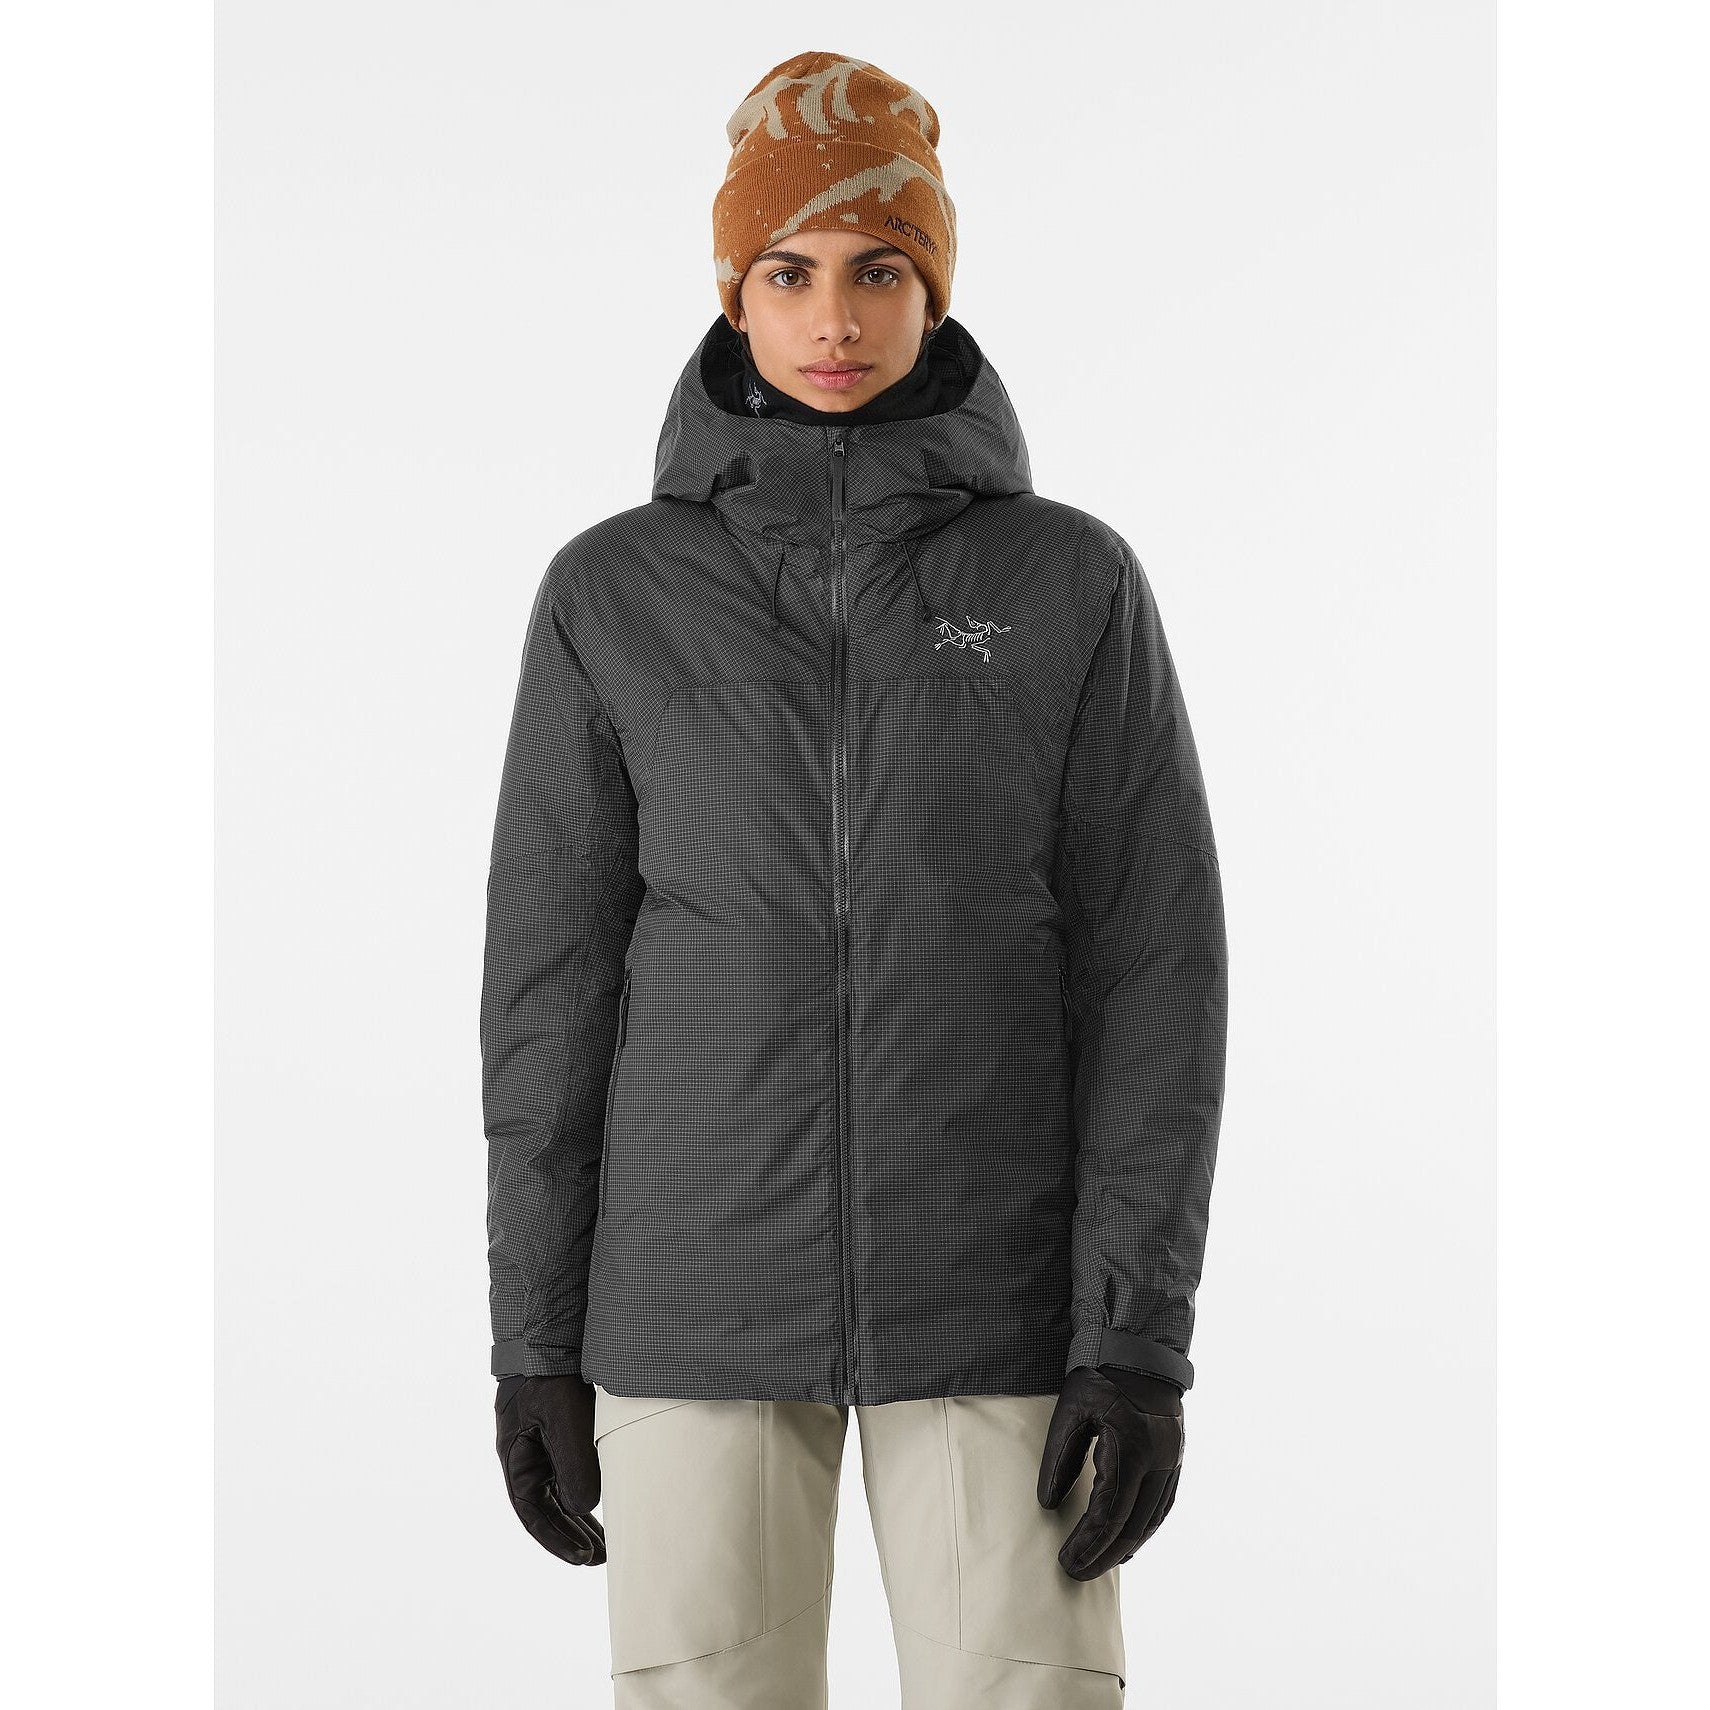 Rush-Insulated-Jacket-Black-Women-s-Front-View_bfbfe439-9305-4fdf-ae8d-72be0e0e444a.jpg